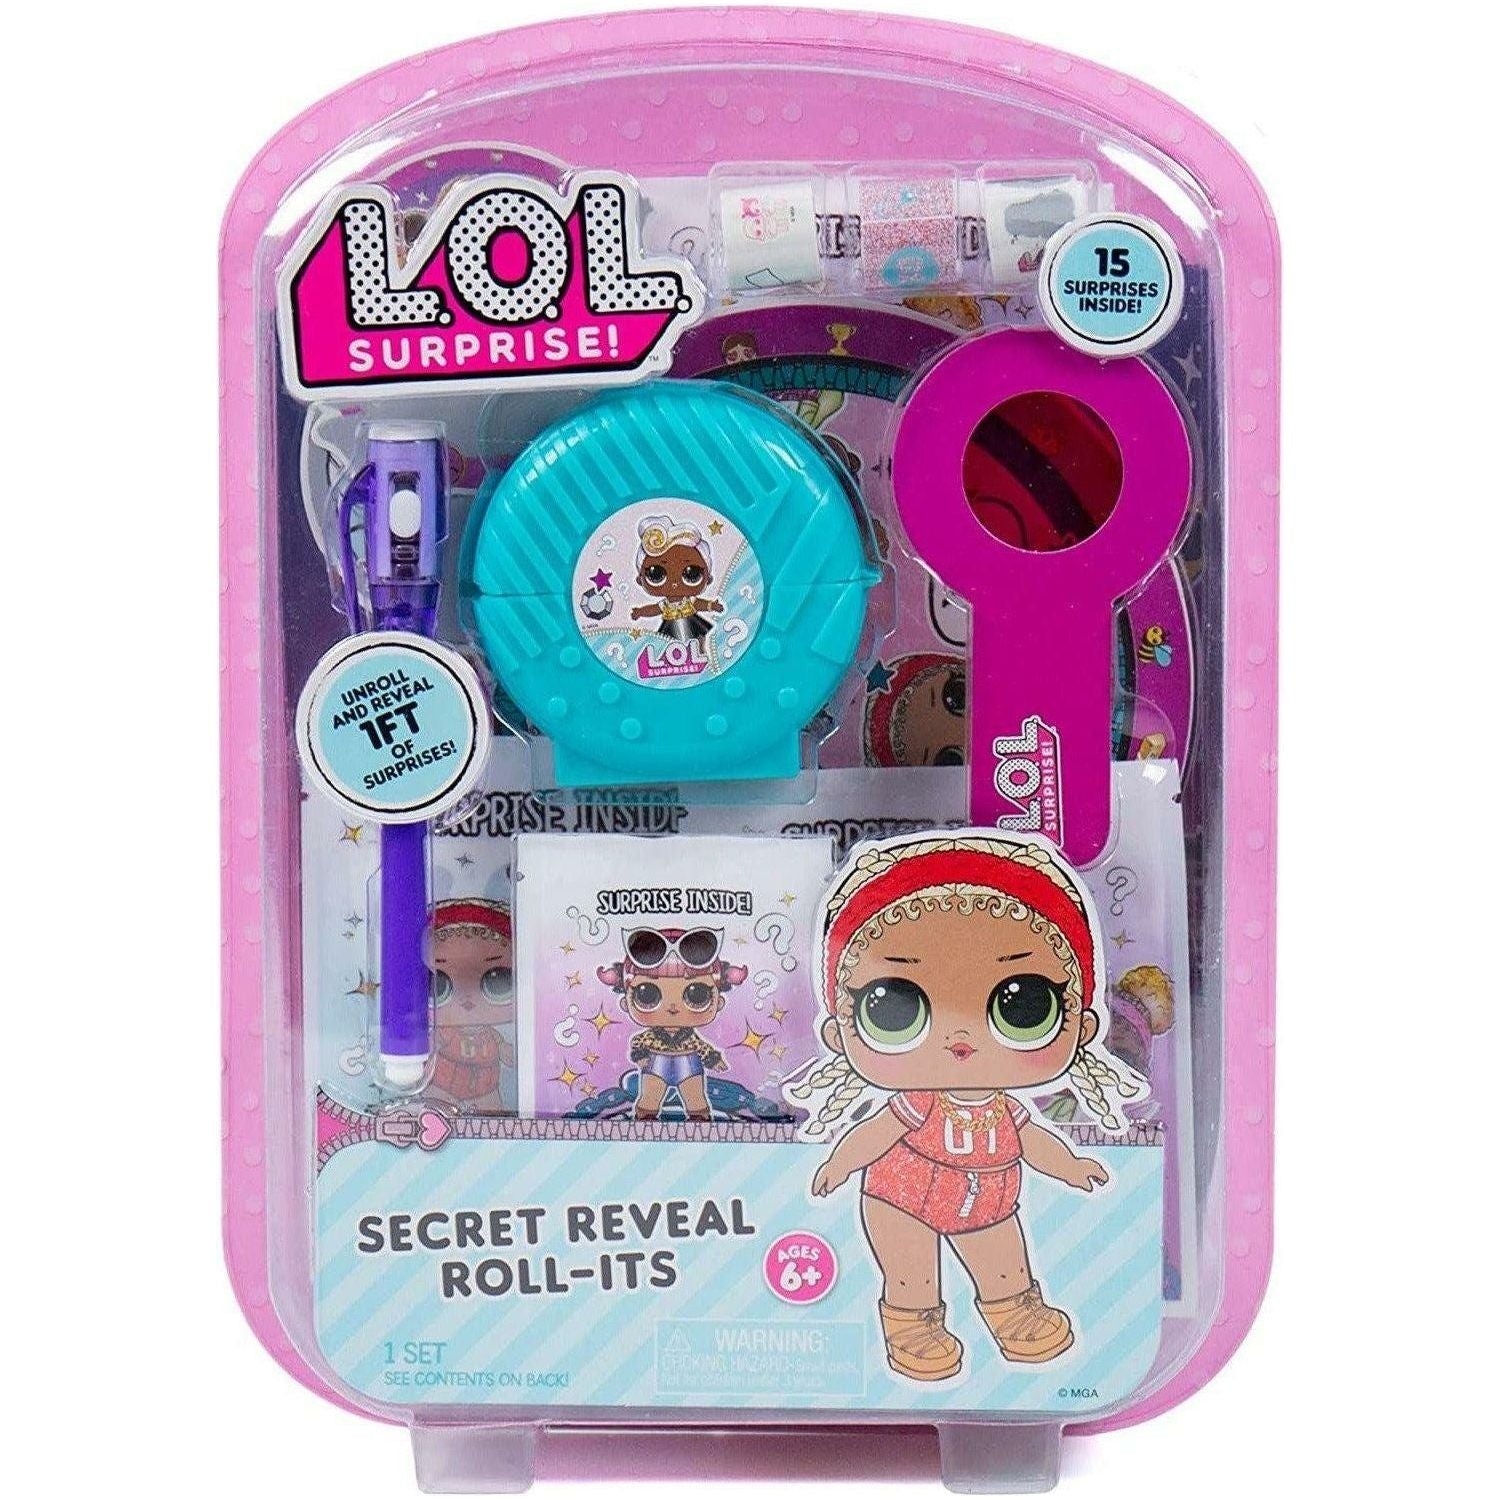 L.O.L Surprise Secret Reveal Roll-Its With 15 Surprises - BumbleToys - 5-7 Years, Amazon, Clearance, Dolls, Fashion Dolls & Accessories, Girls, L.O.L